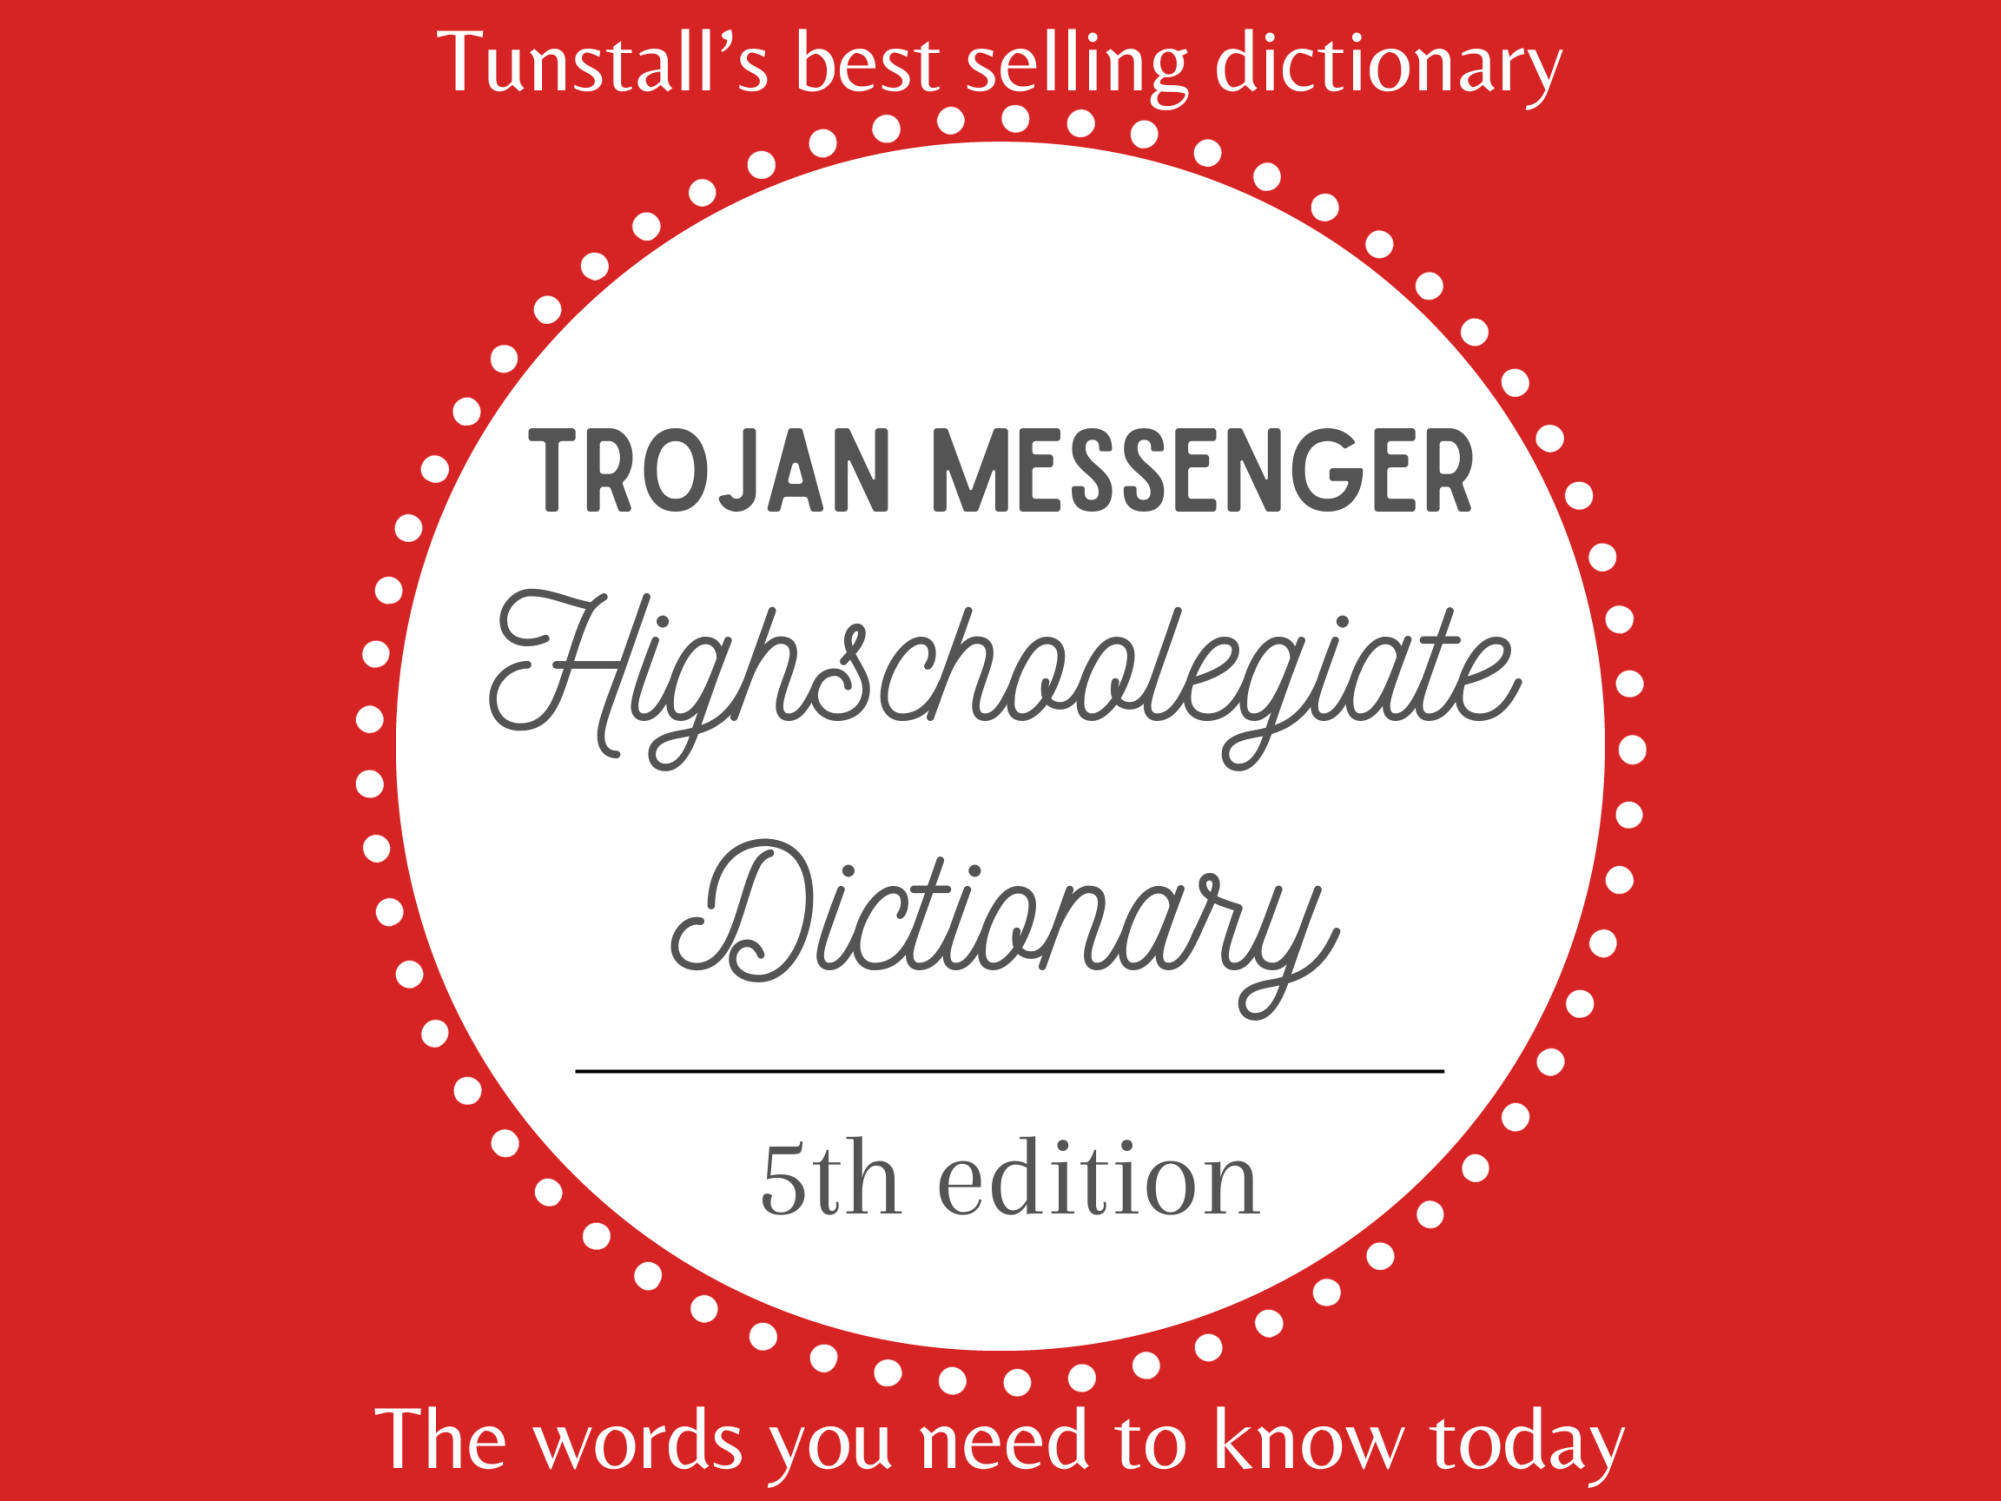 Cover of Tunstalls best selling dictionary remade for the fifth edition